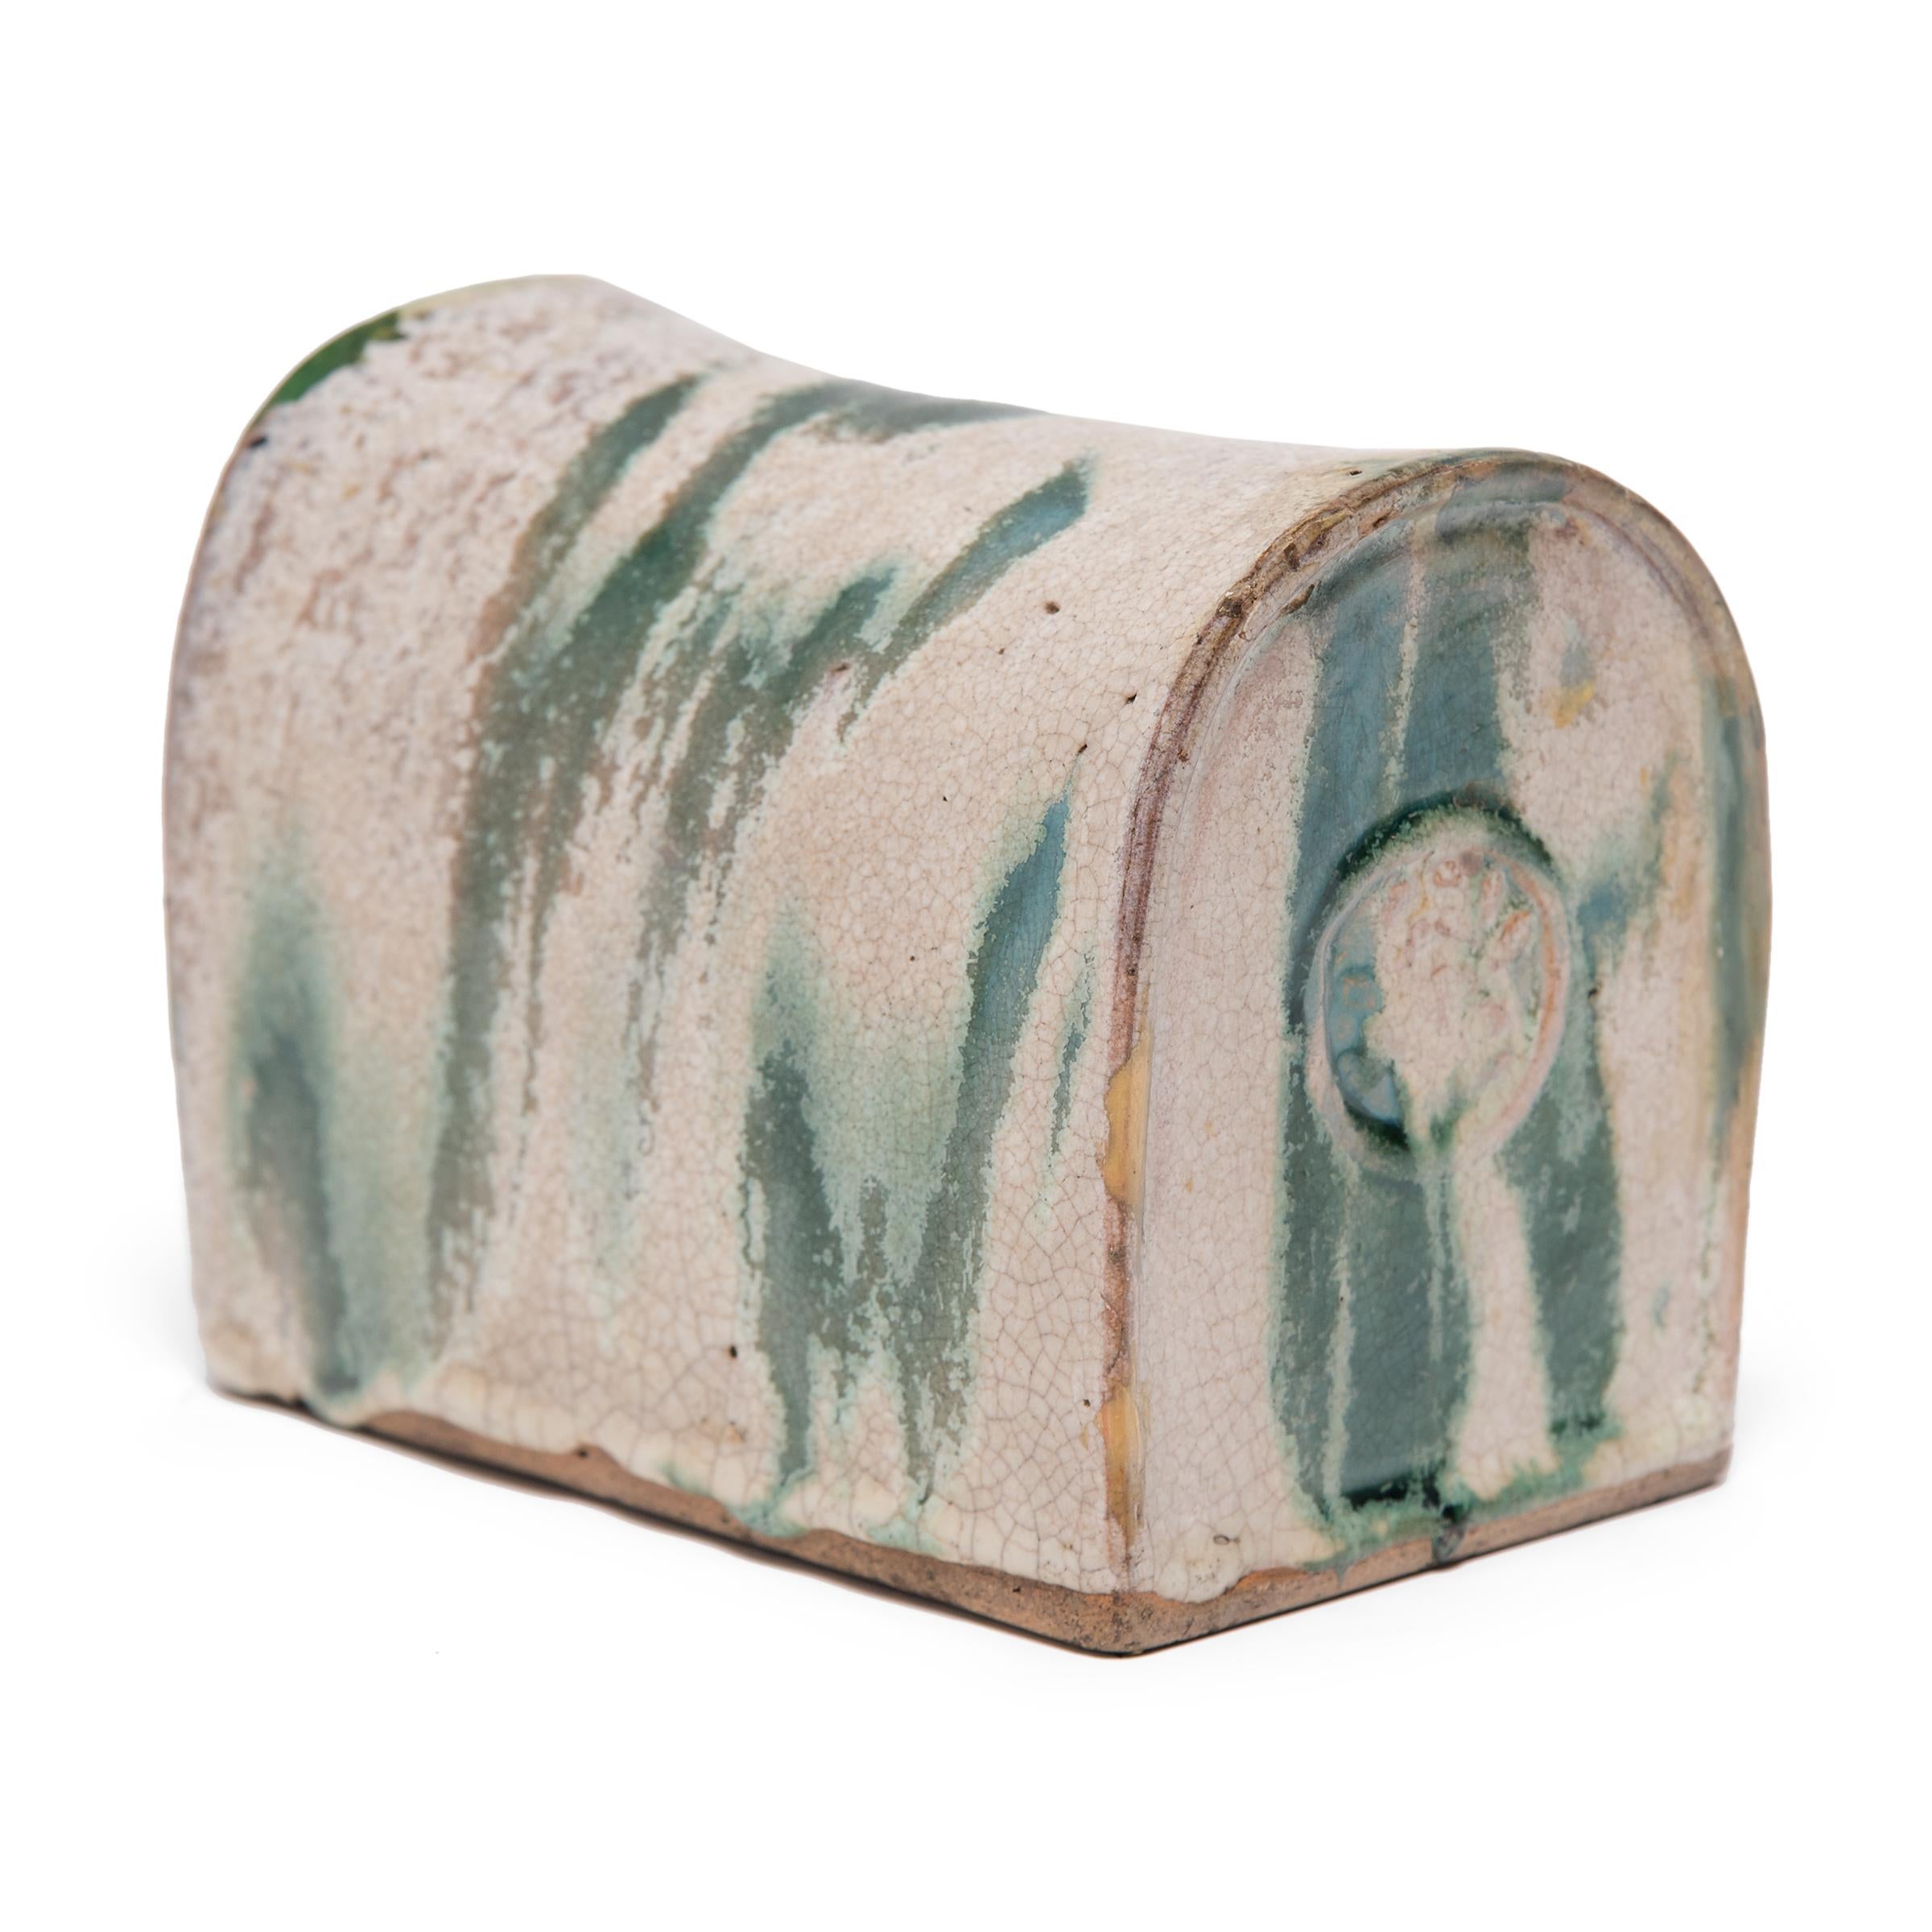 To keep her elaborate hairstyle intact while sleeping, a well-to-do woman once used this ceramic headrest as a pillow. Dating to the late Ming dynasty, this glazed headrest embodies the quiet simplicity of the era. A glassy blue-green glaze drips